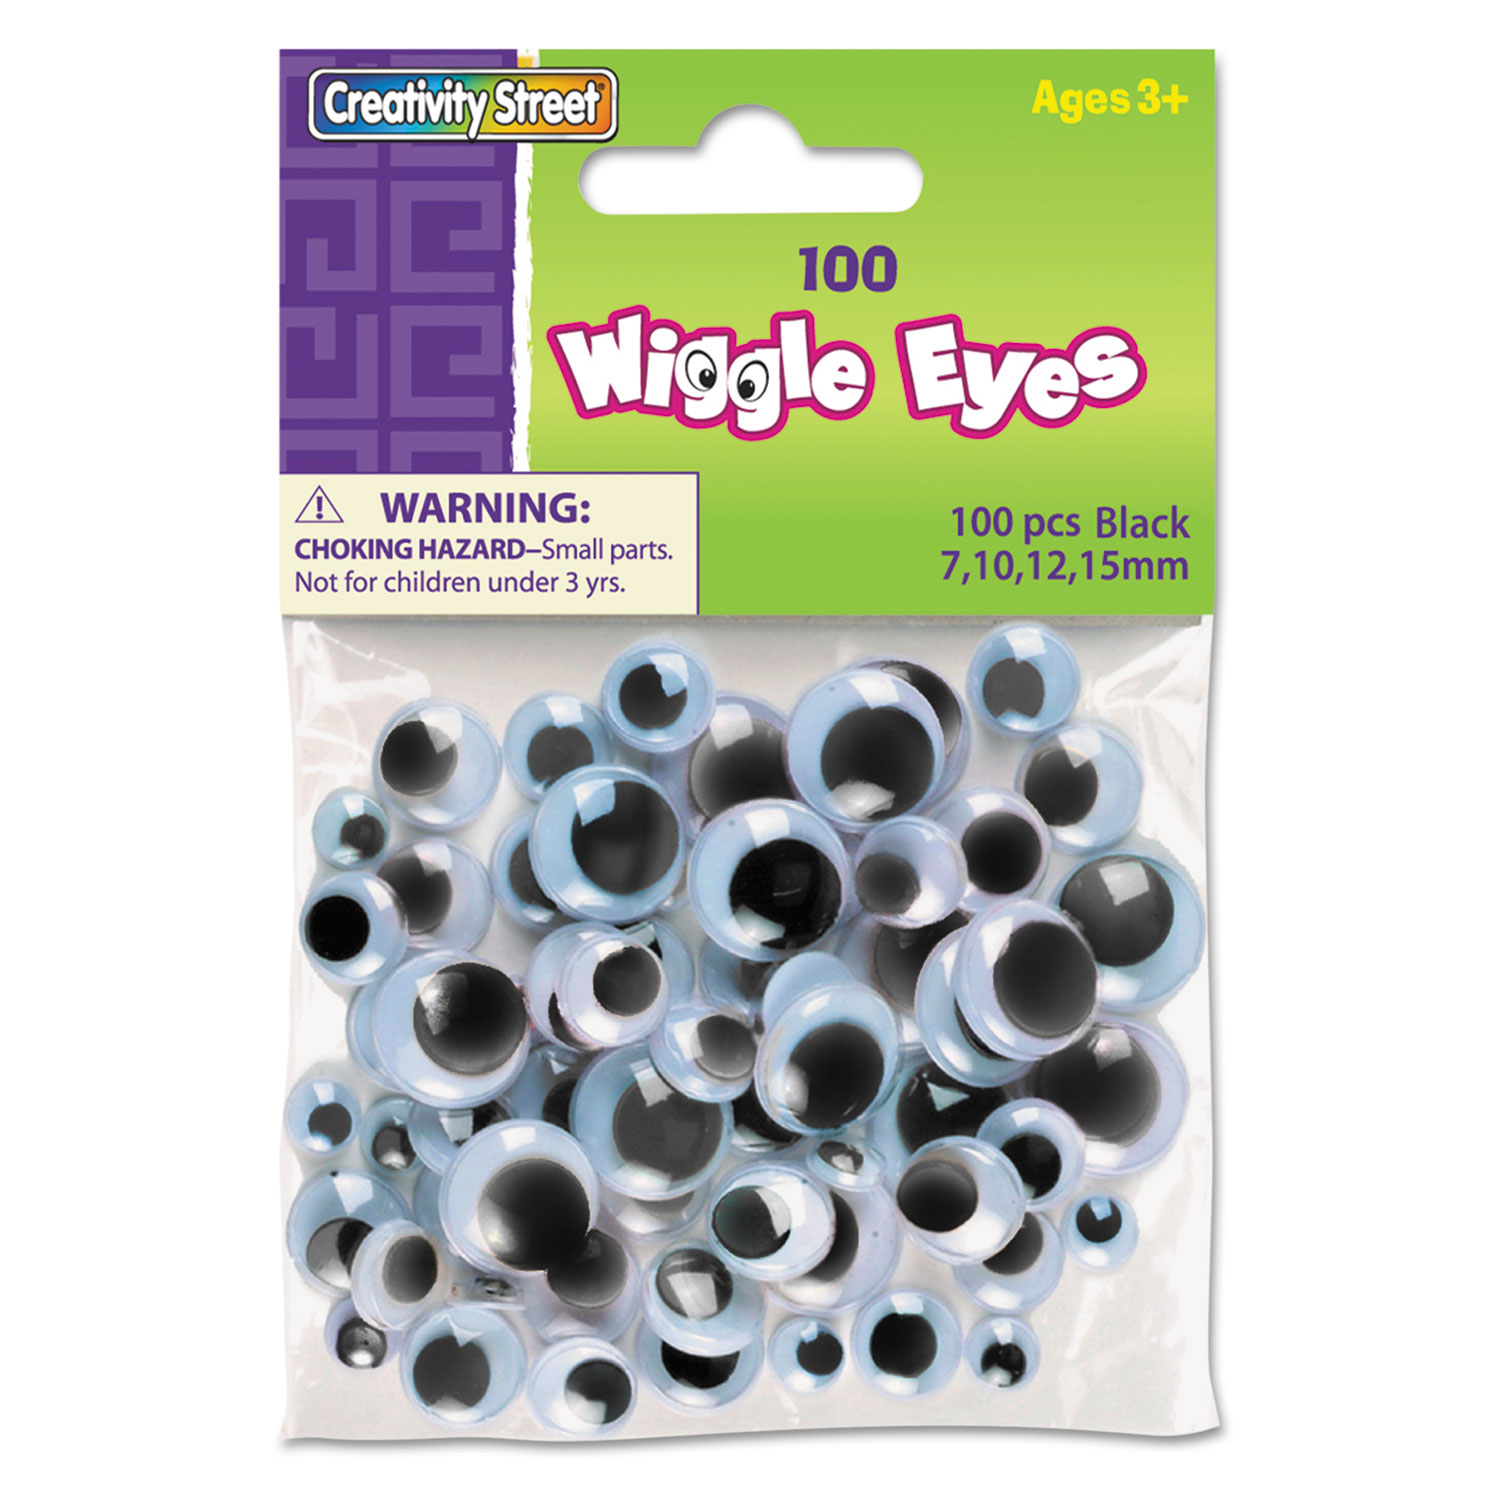 Wiggle Eyes Assortment, Assorted Sizes, Black, 100/Pack